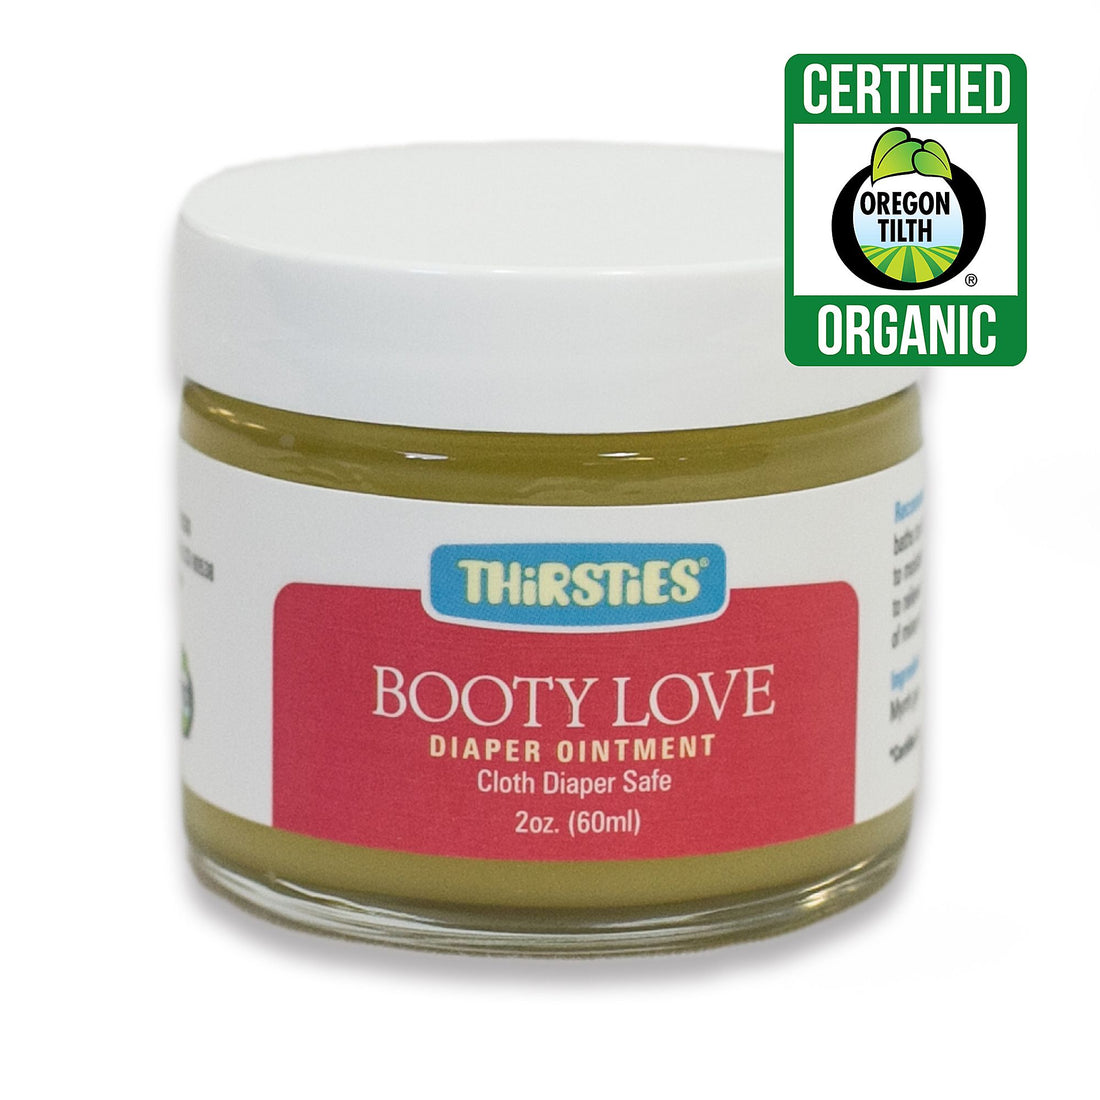 Thirsties Diaper Ointment